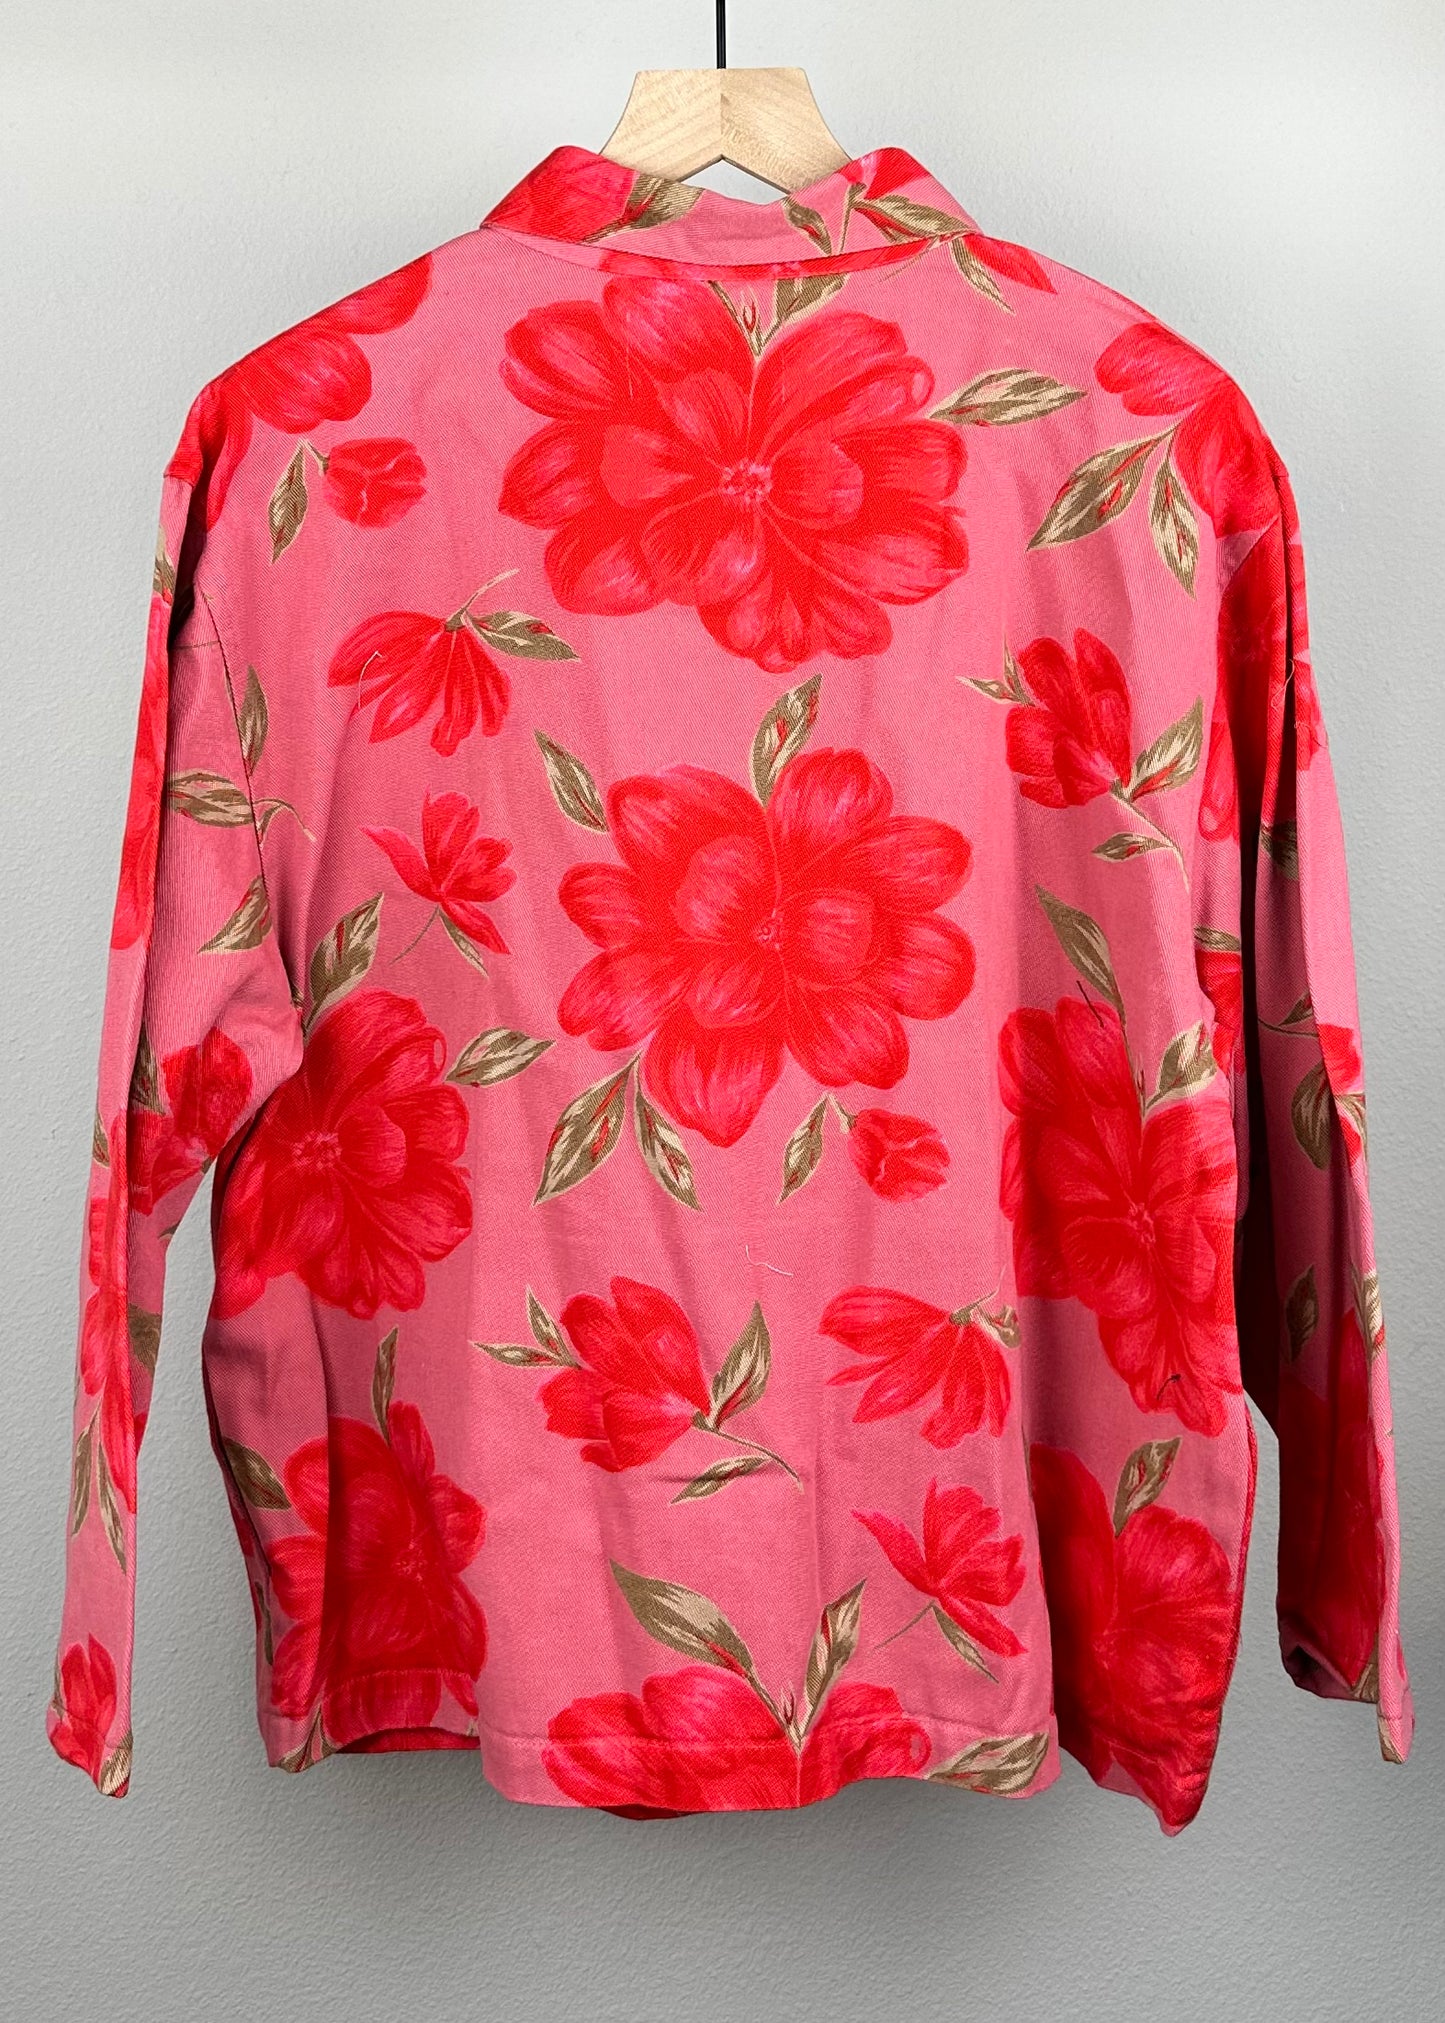 Pink & Red Flower Jacket By Tantrums